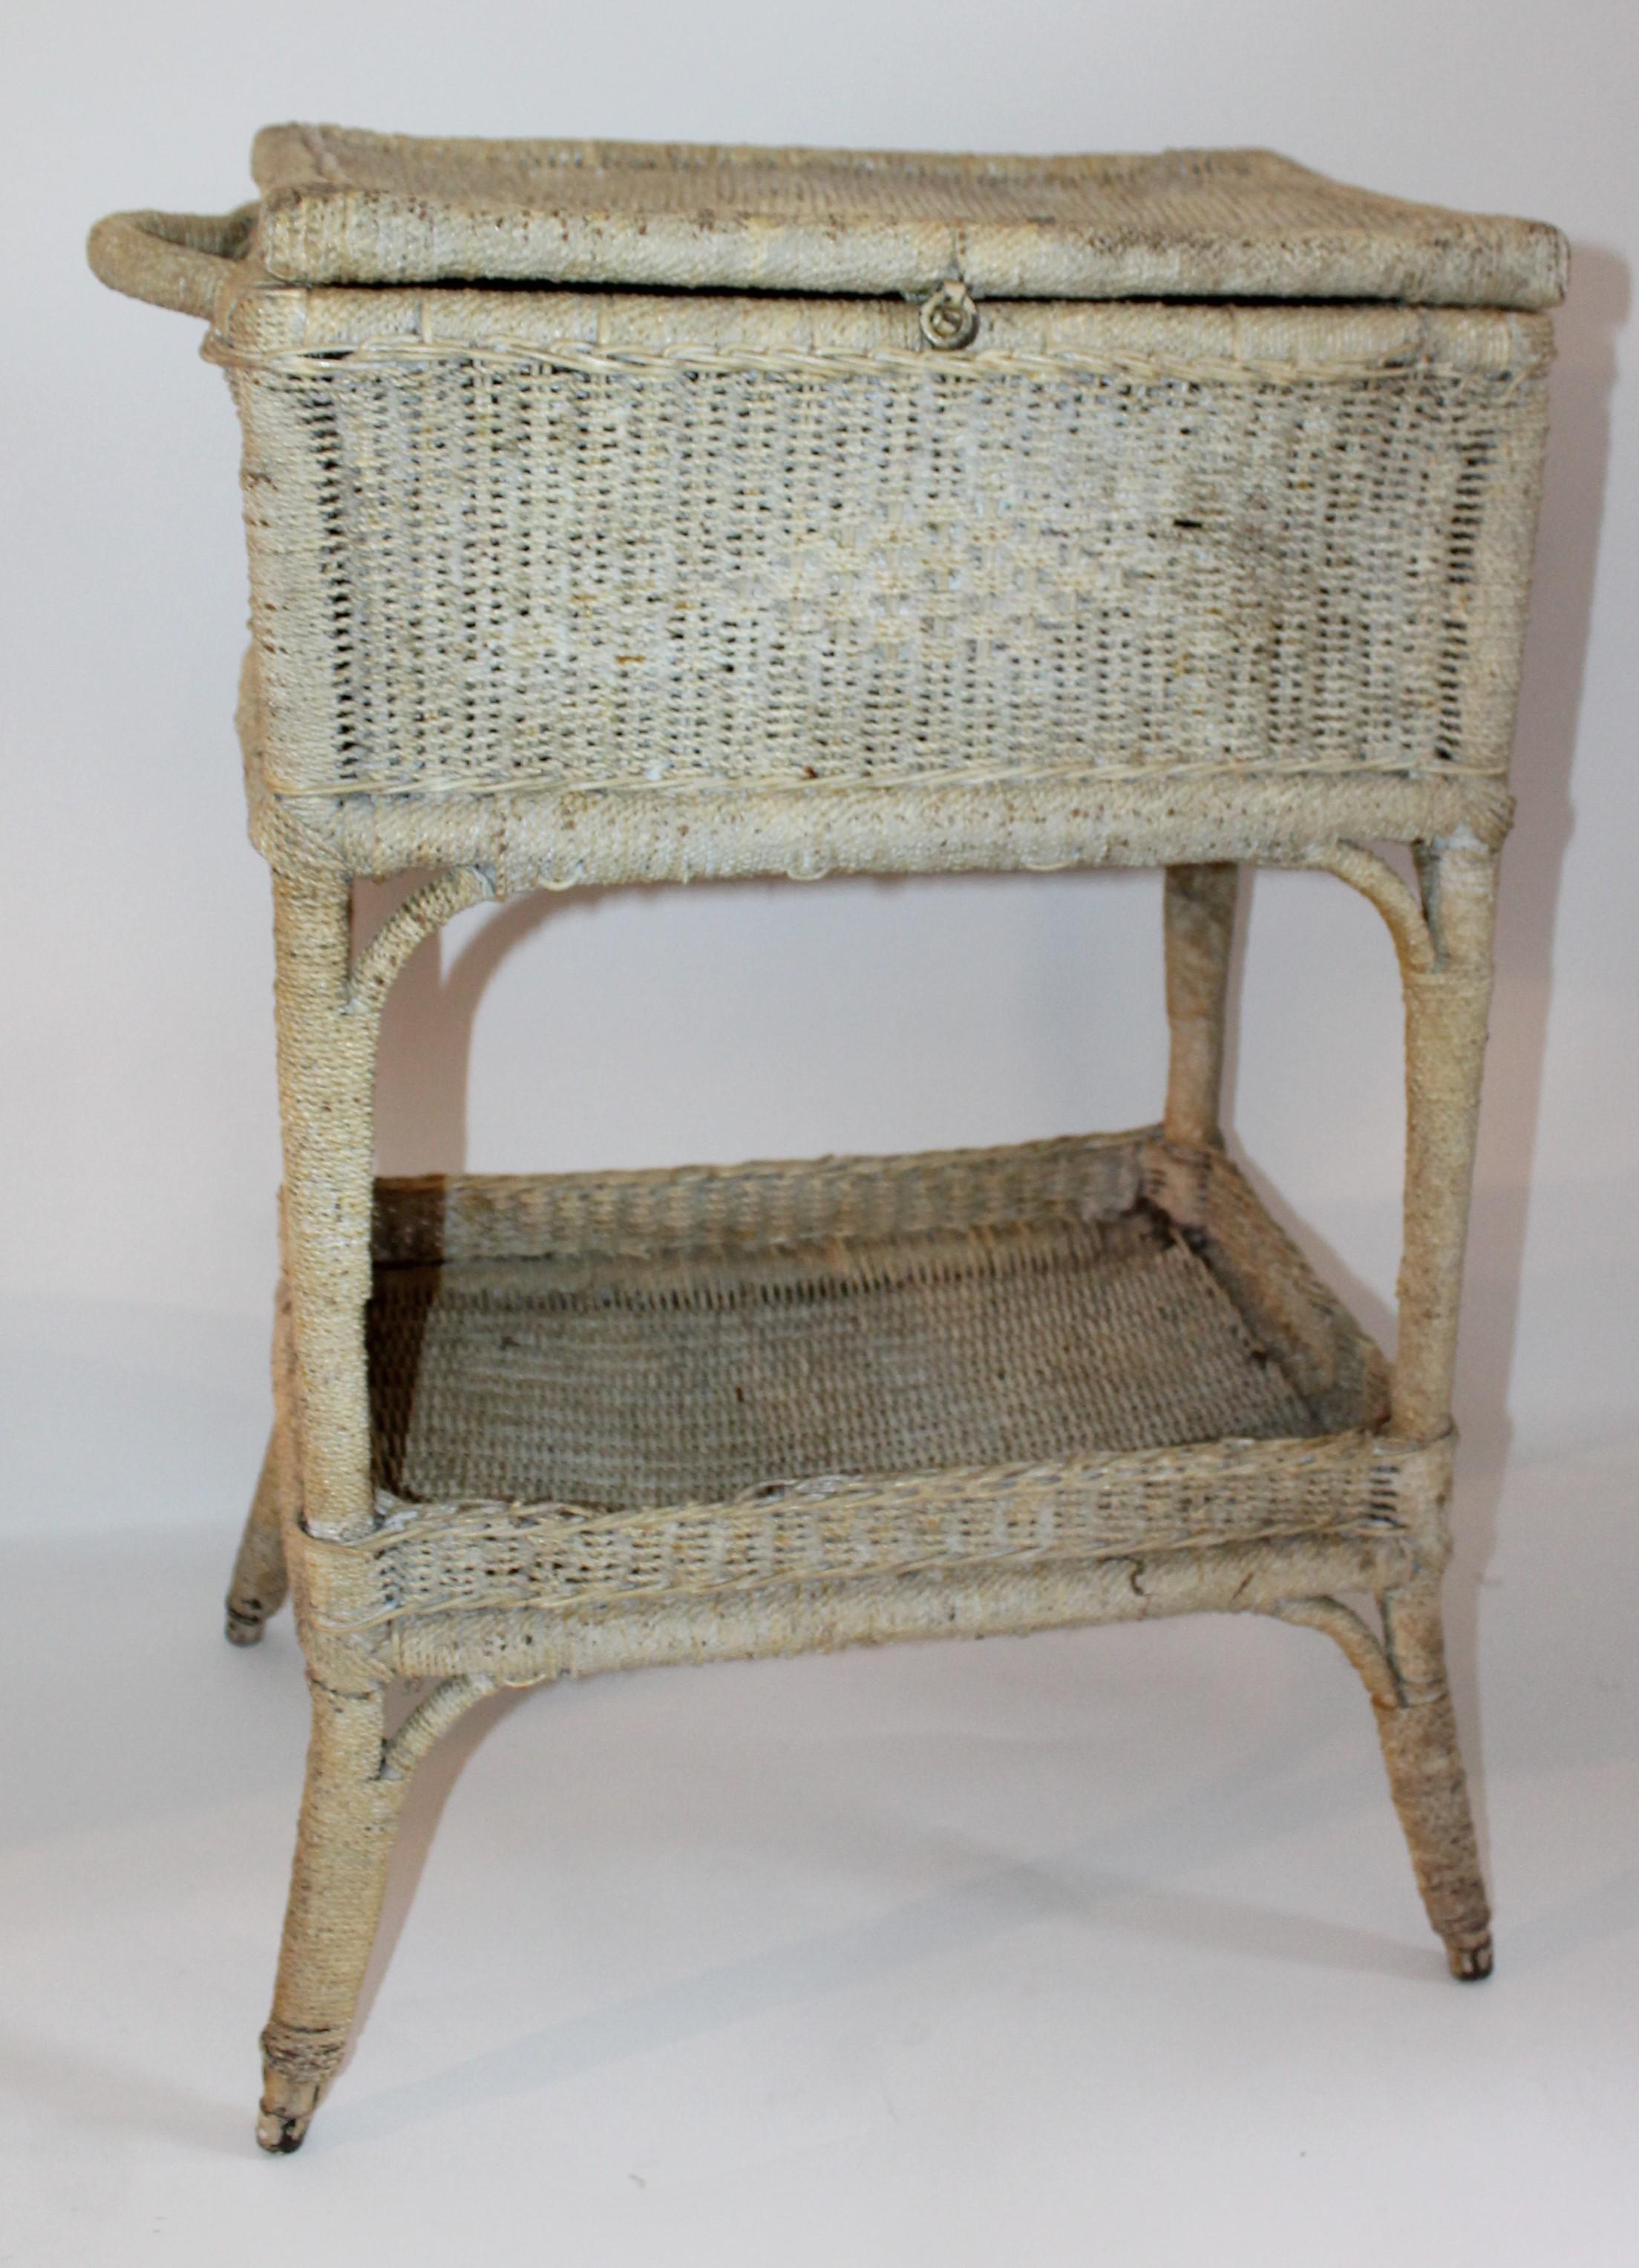 This fine handwoven and original creamy yellow sea grass side table or end table is in good condition and very sturdy. The top has a slight dip in it from age and use. It looks like it was used as a sewing basket stand. Fantastic side table on a